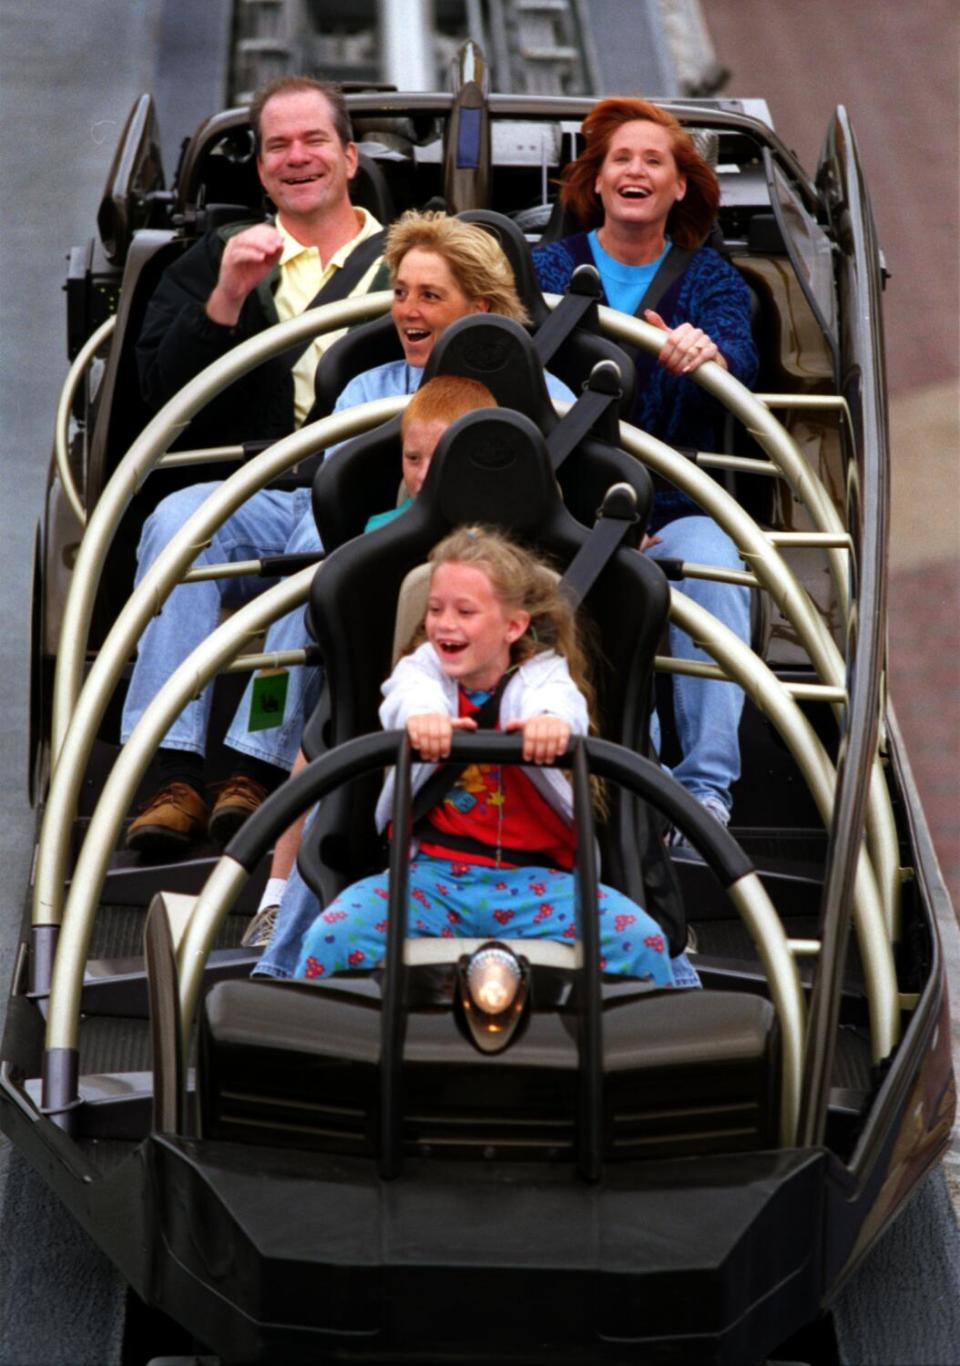 A group of people riding a rocket-themed ride at Disneyland.